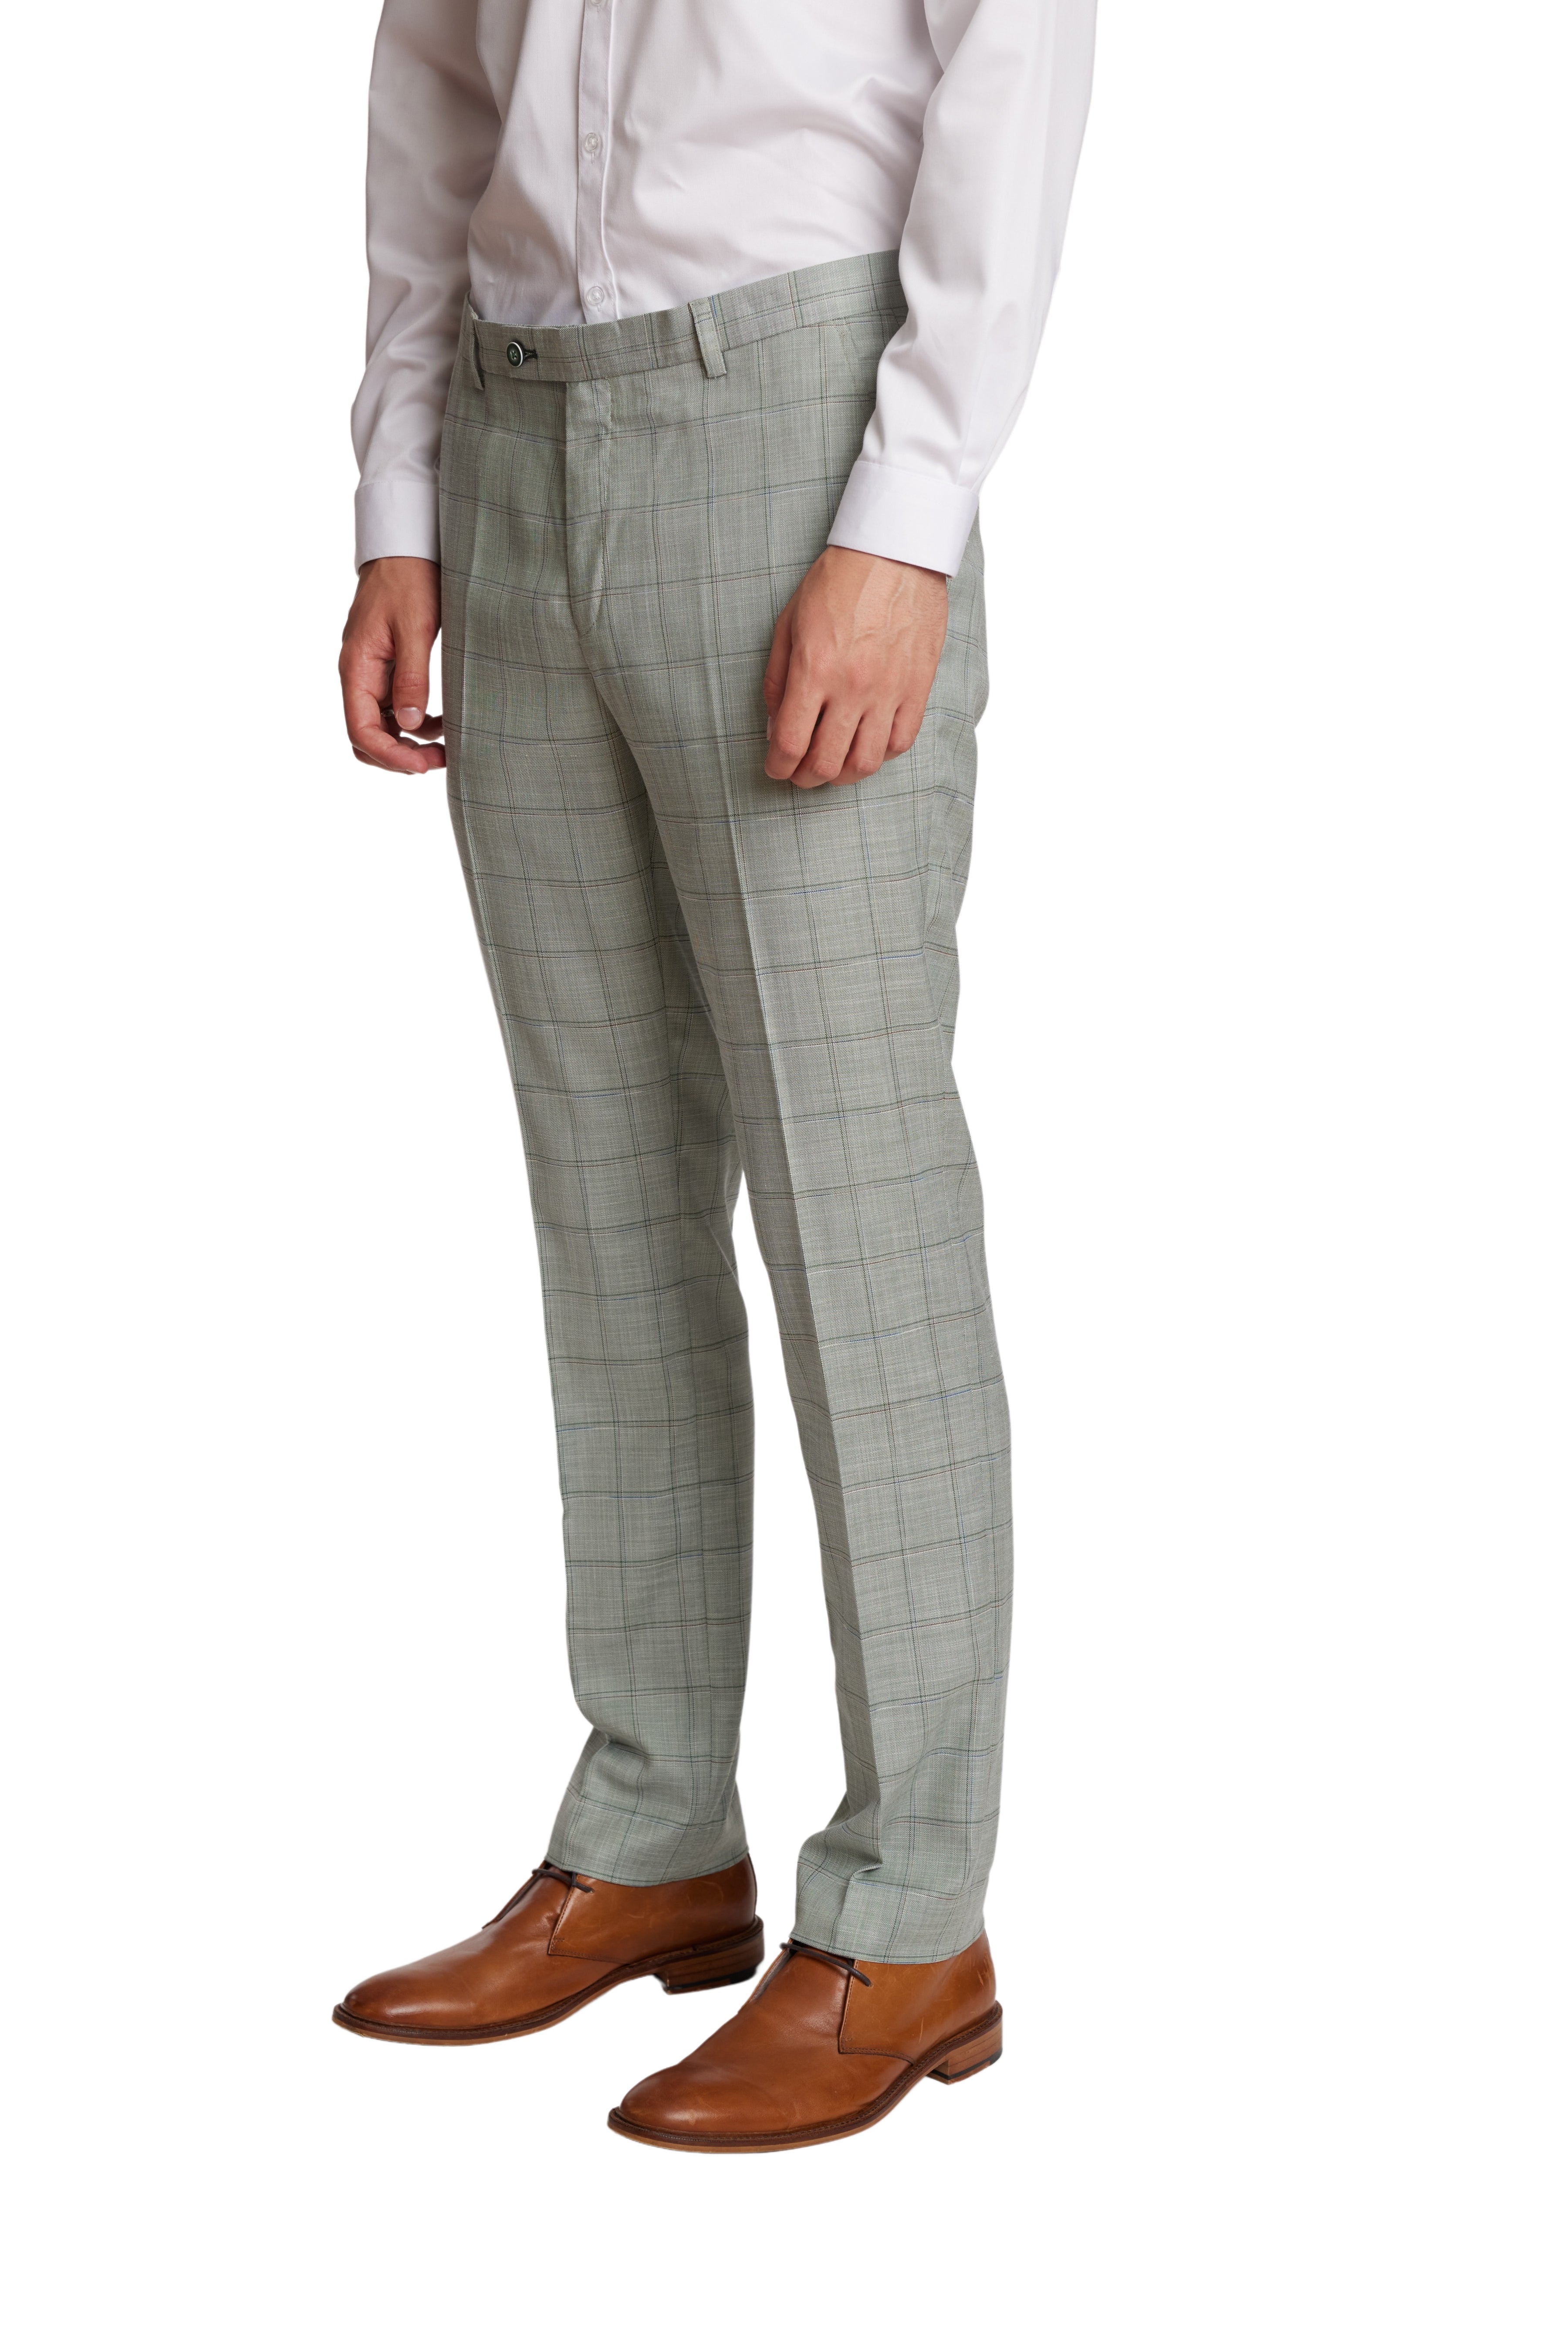 Downing Pants - slim - Green Double Check